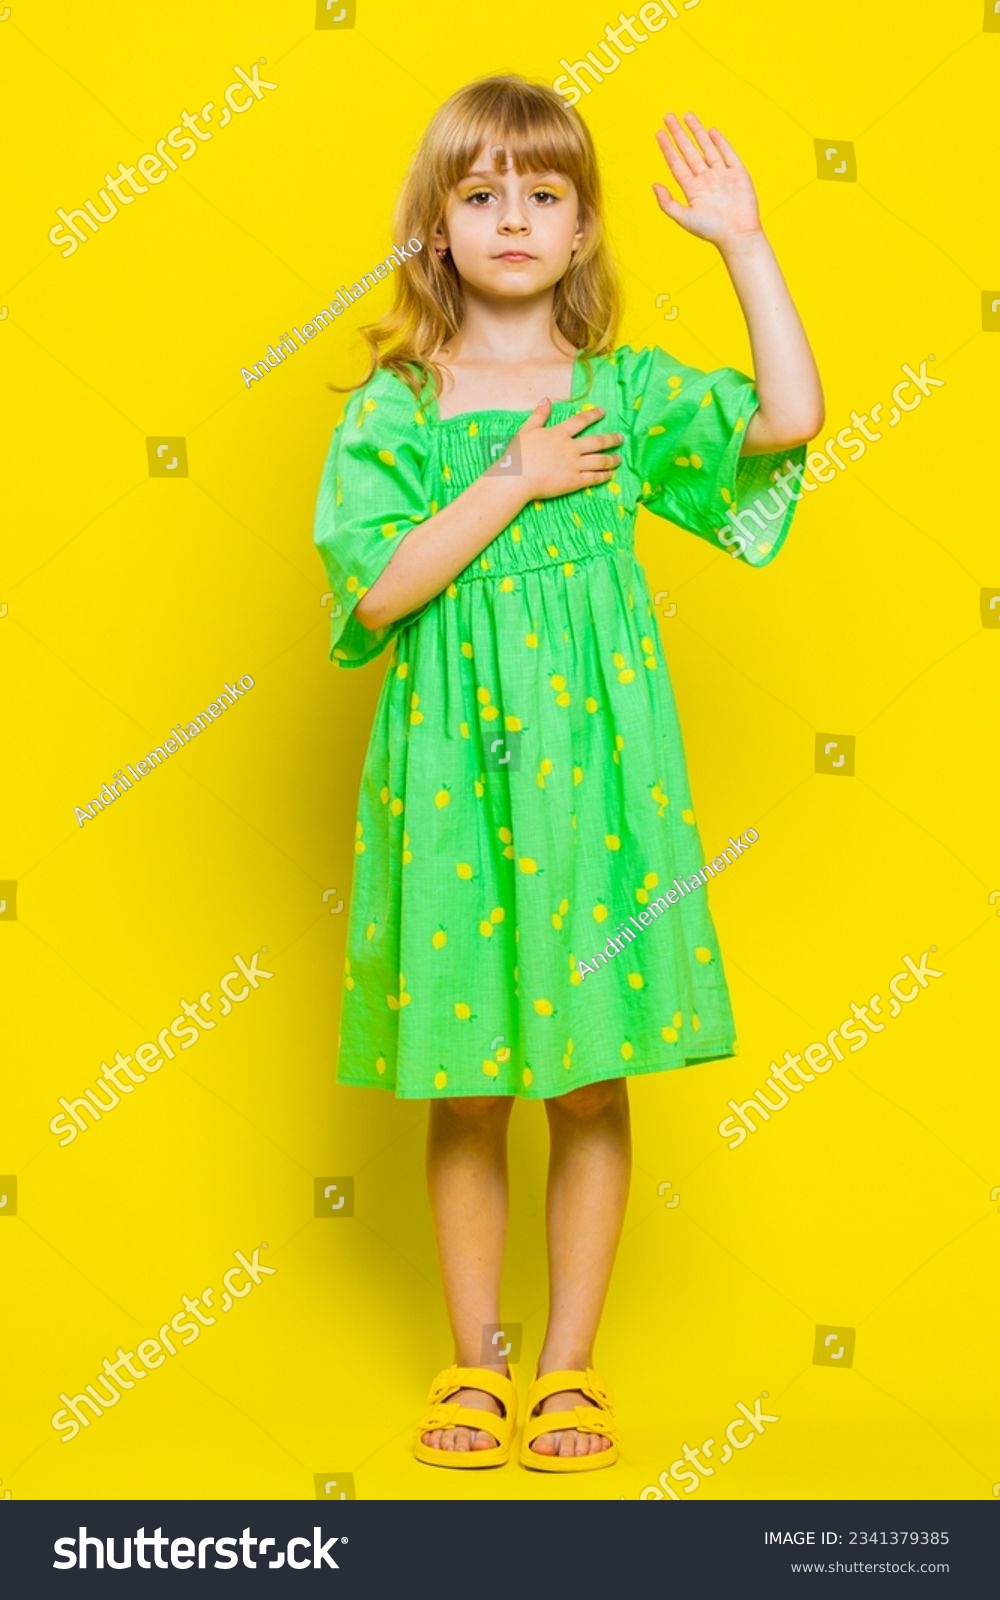 I swear to be honest. Sincere responsible child girl kid raising hand to take oath, promising to be honest tell truth be polite, keeping hand on chest. Preteen children on yellow background. Vertical #2341379385